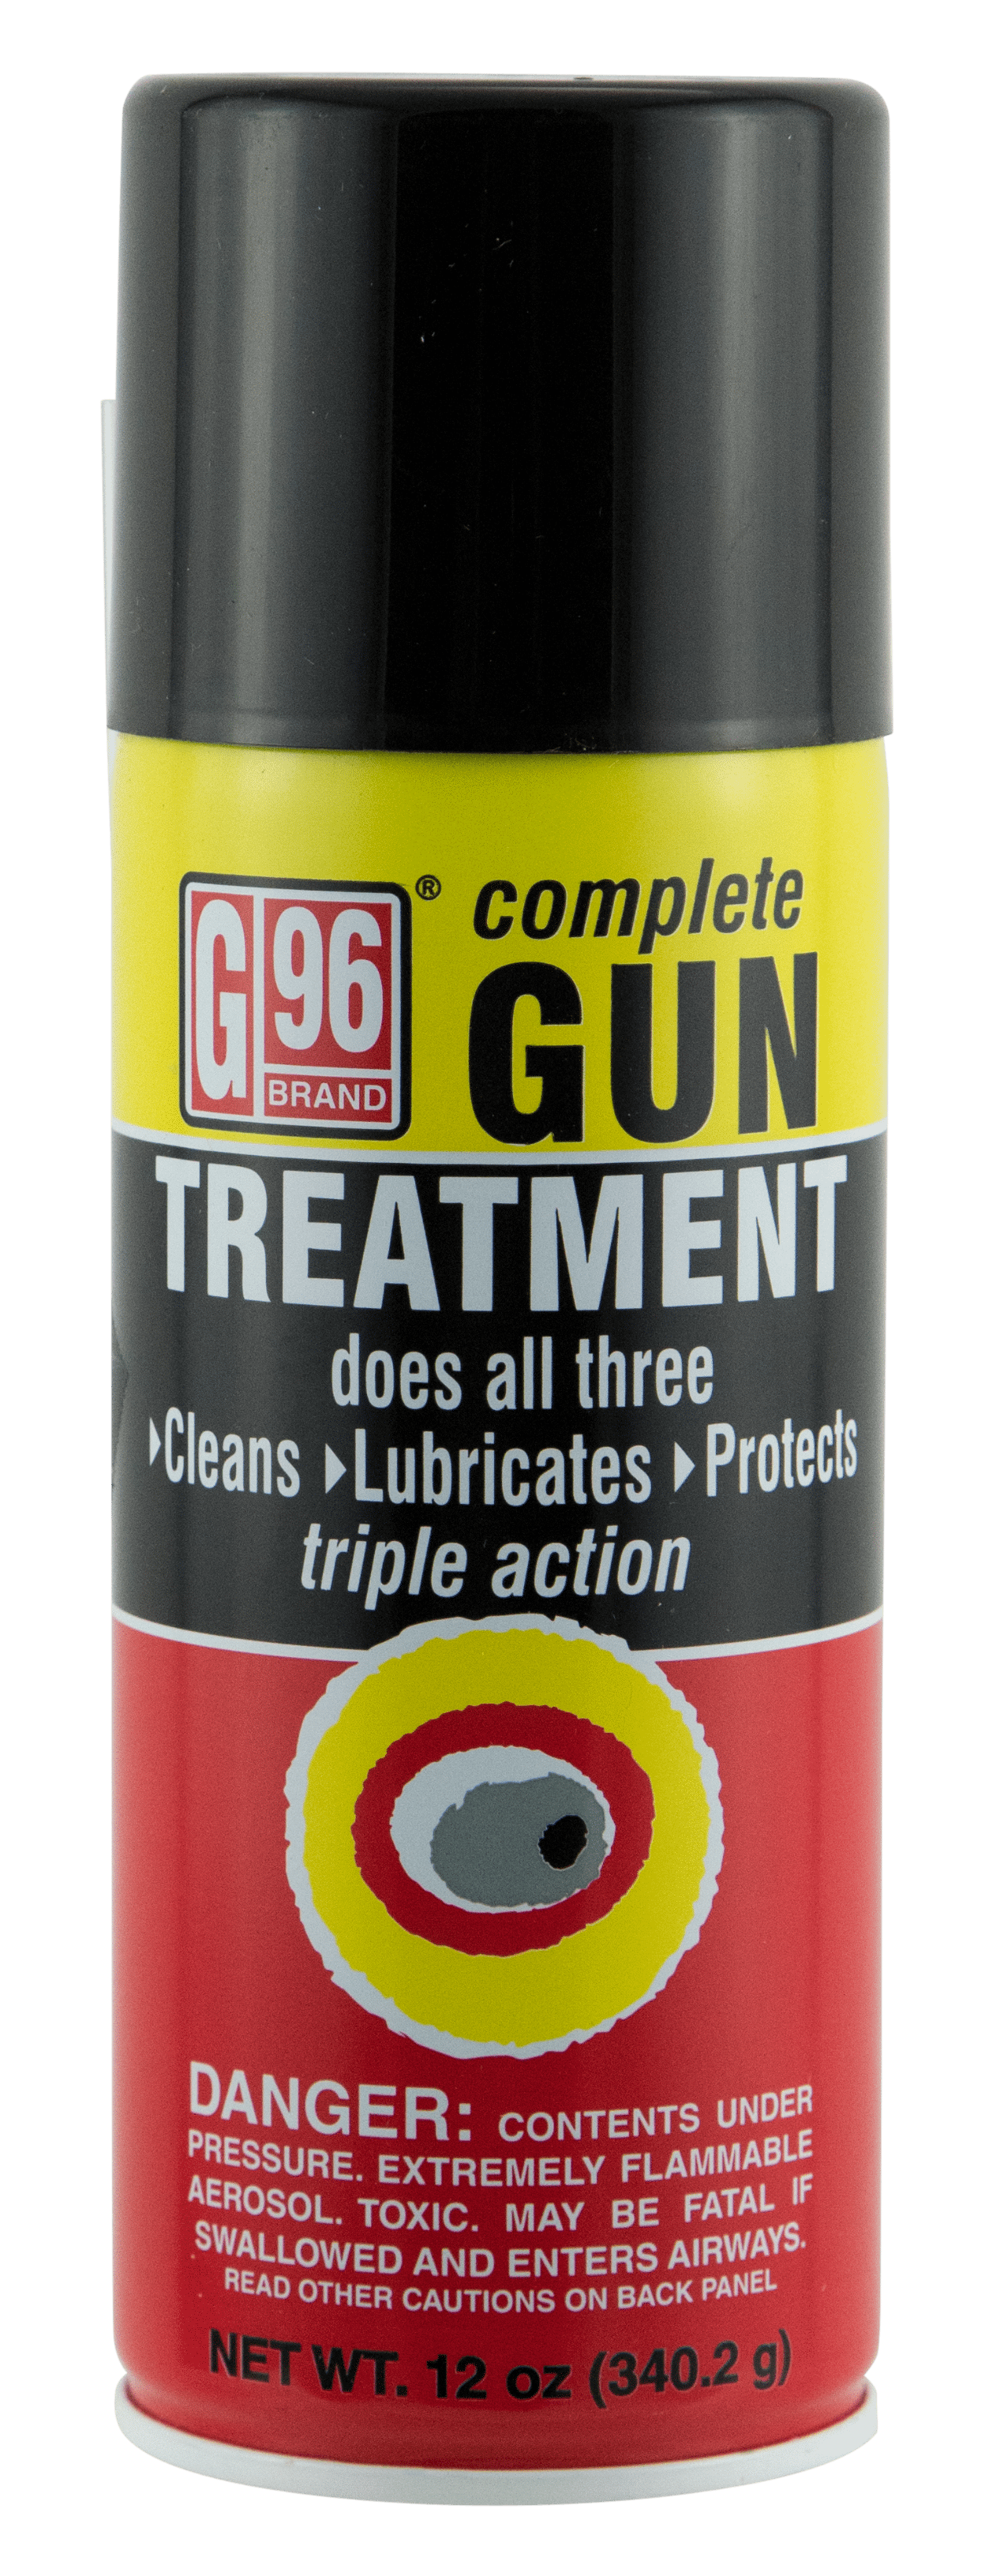 G96 Products G96 Case Pack Of 12 Gun - Treatment 12oz. Aerosol Cleaning And Gun Care